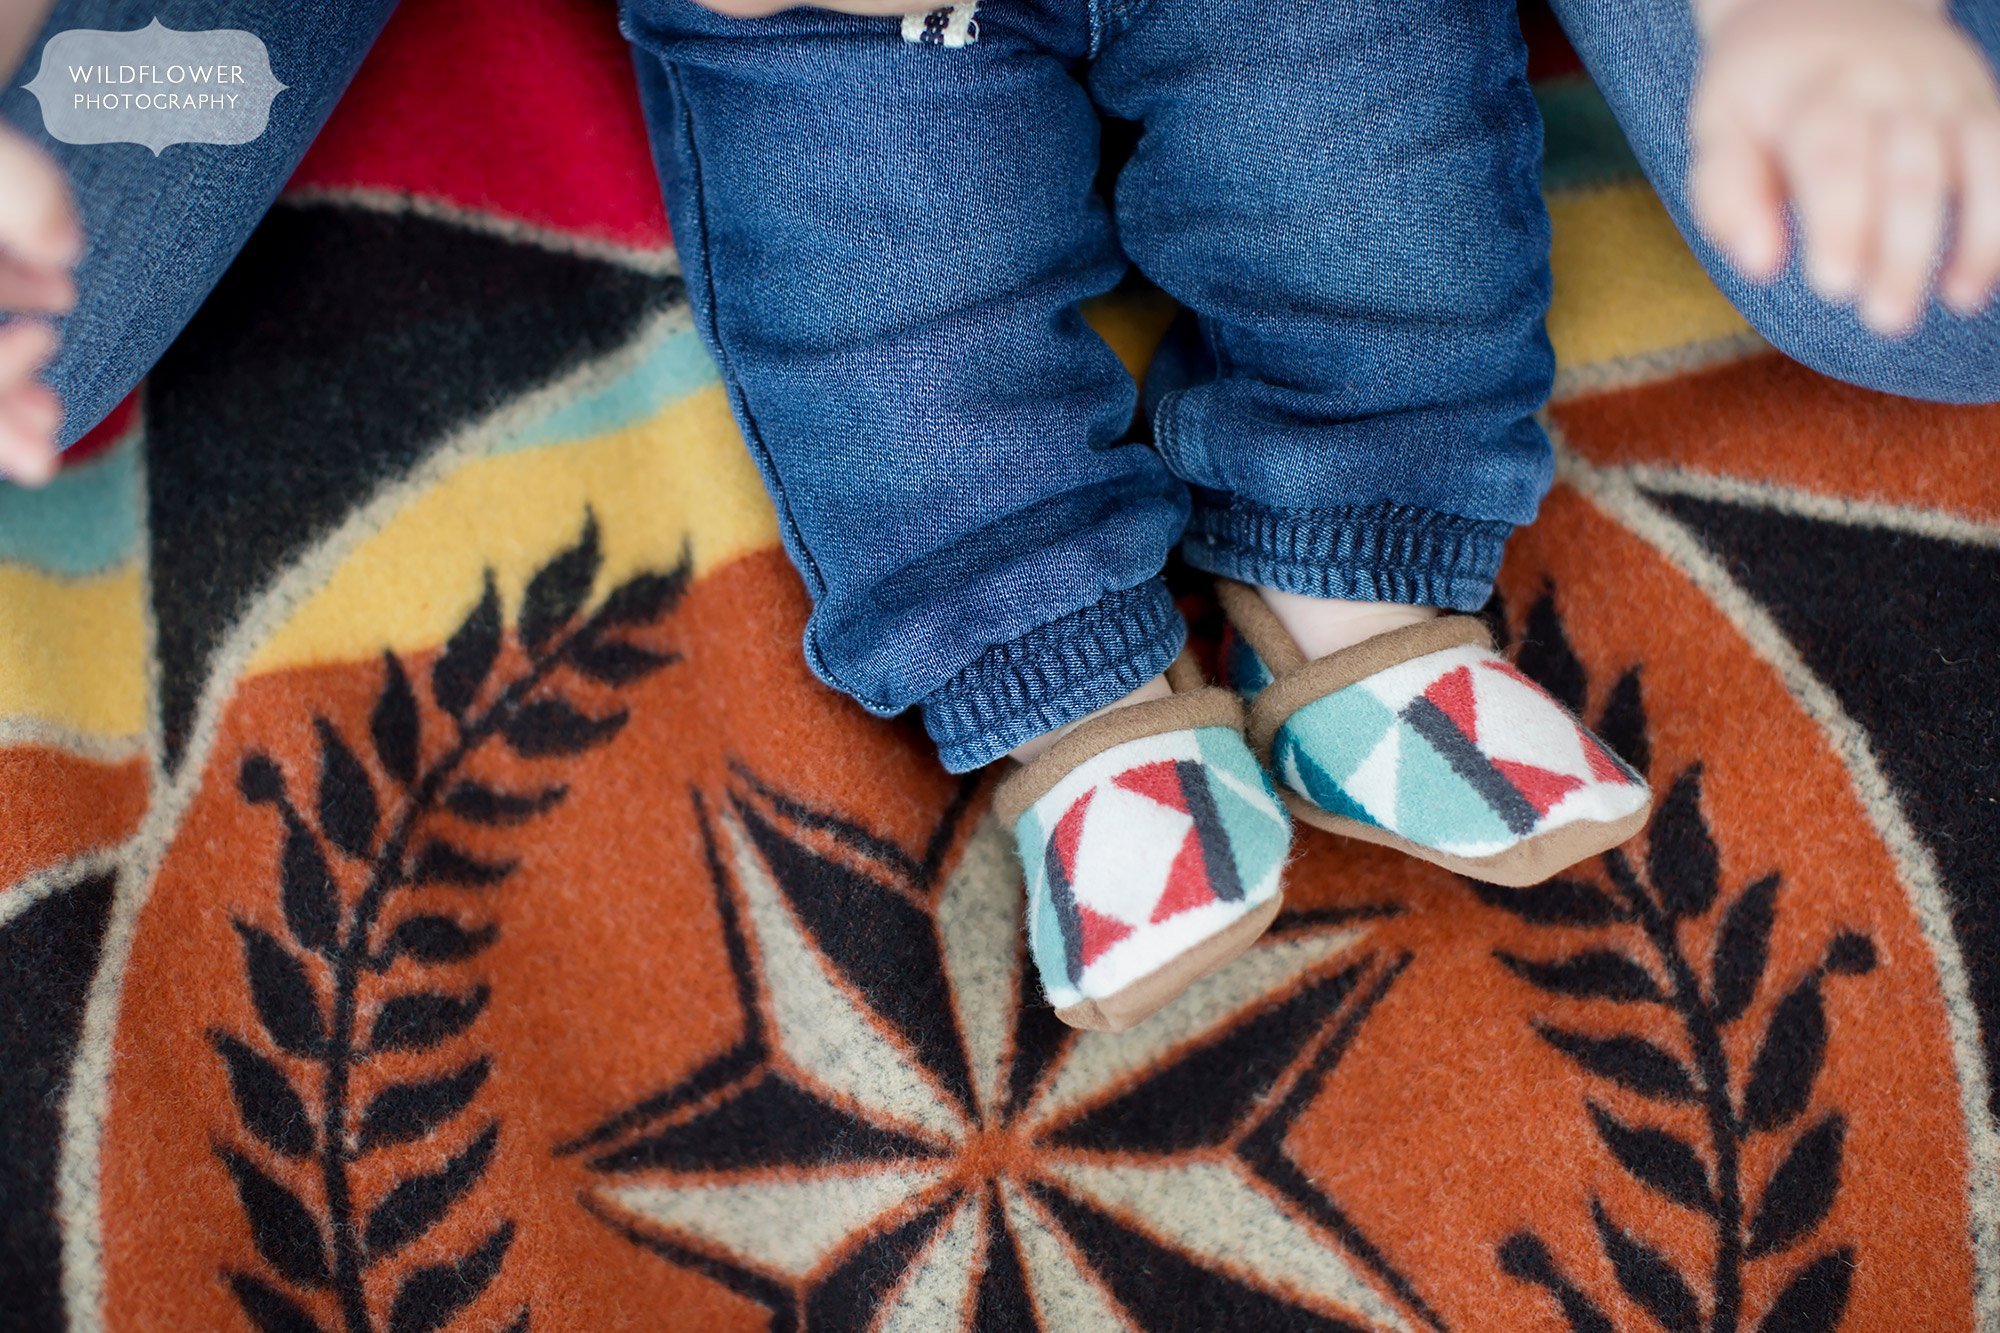 Adorable Native American style wool baby booties by Pendleton in Columbia, MO.